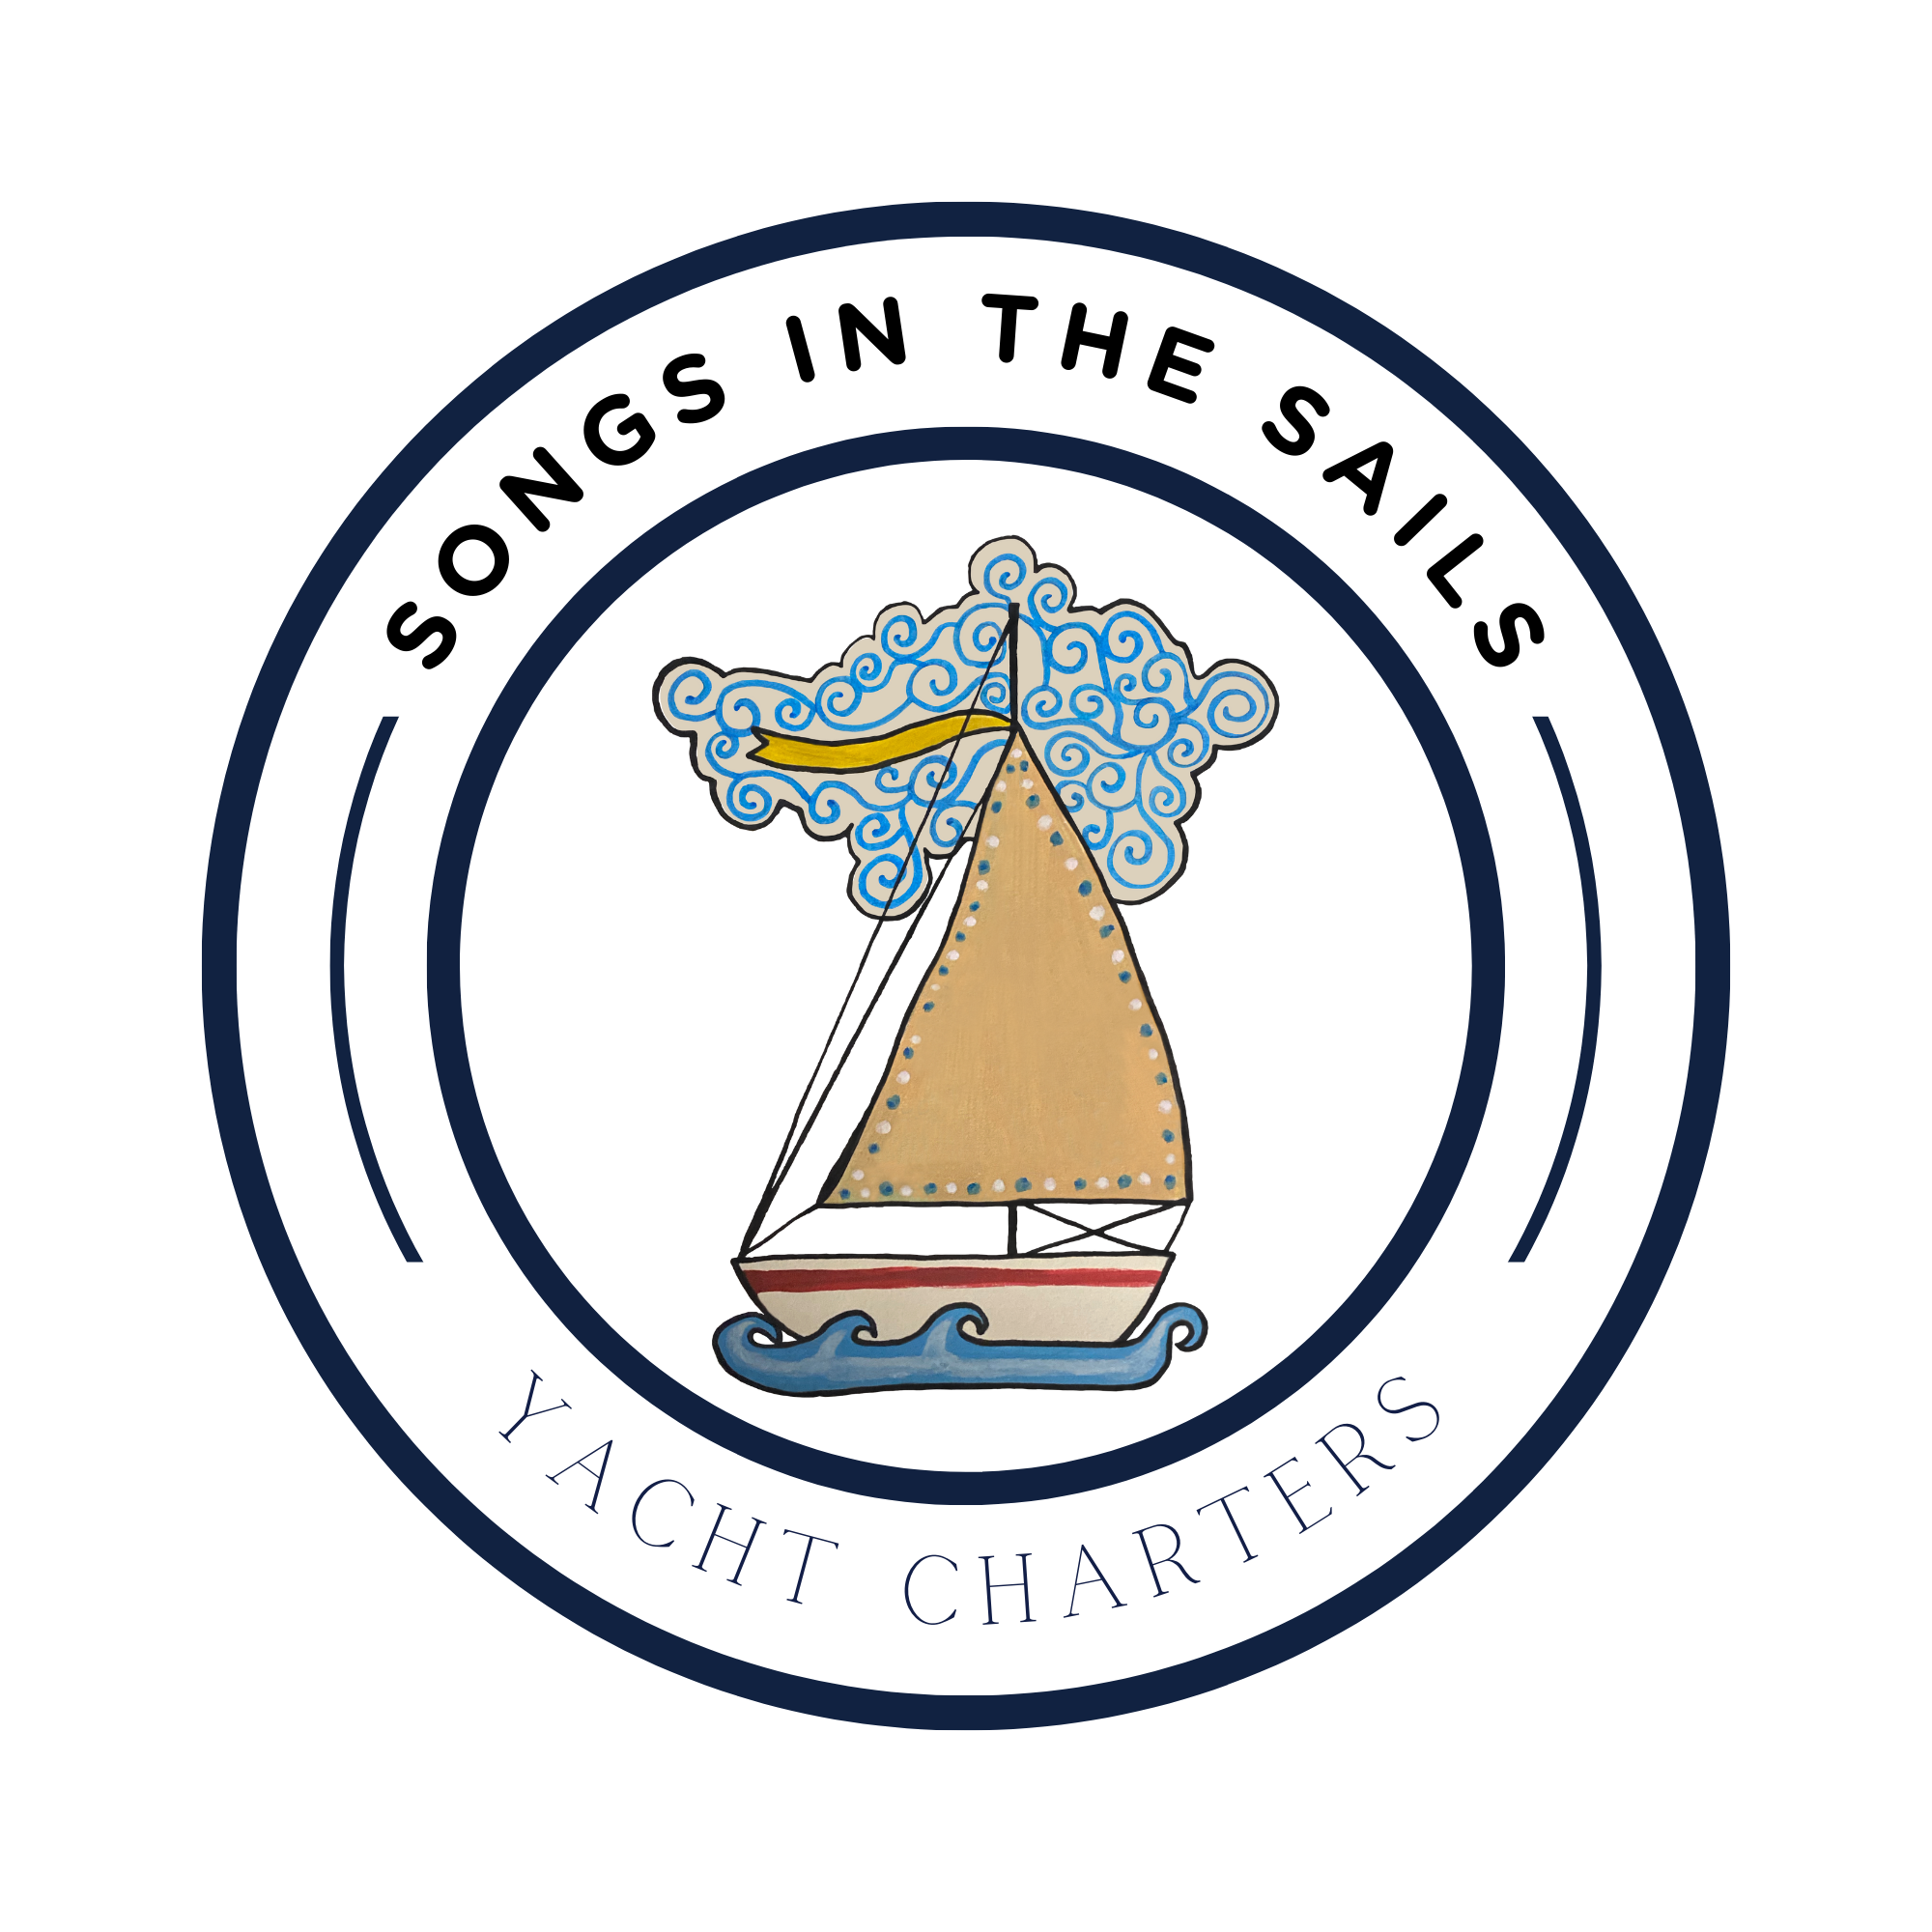 Songs In The Sails Yacht Charter